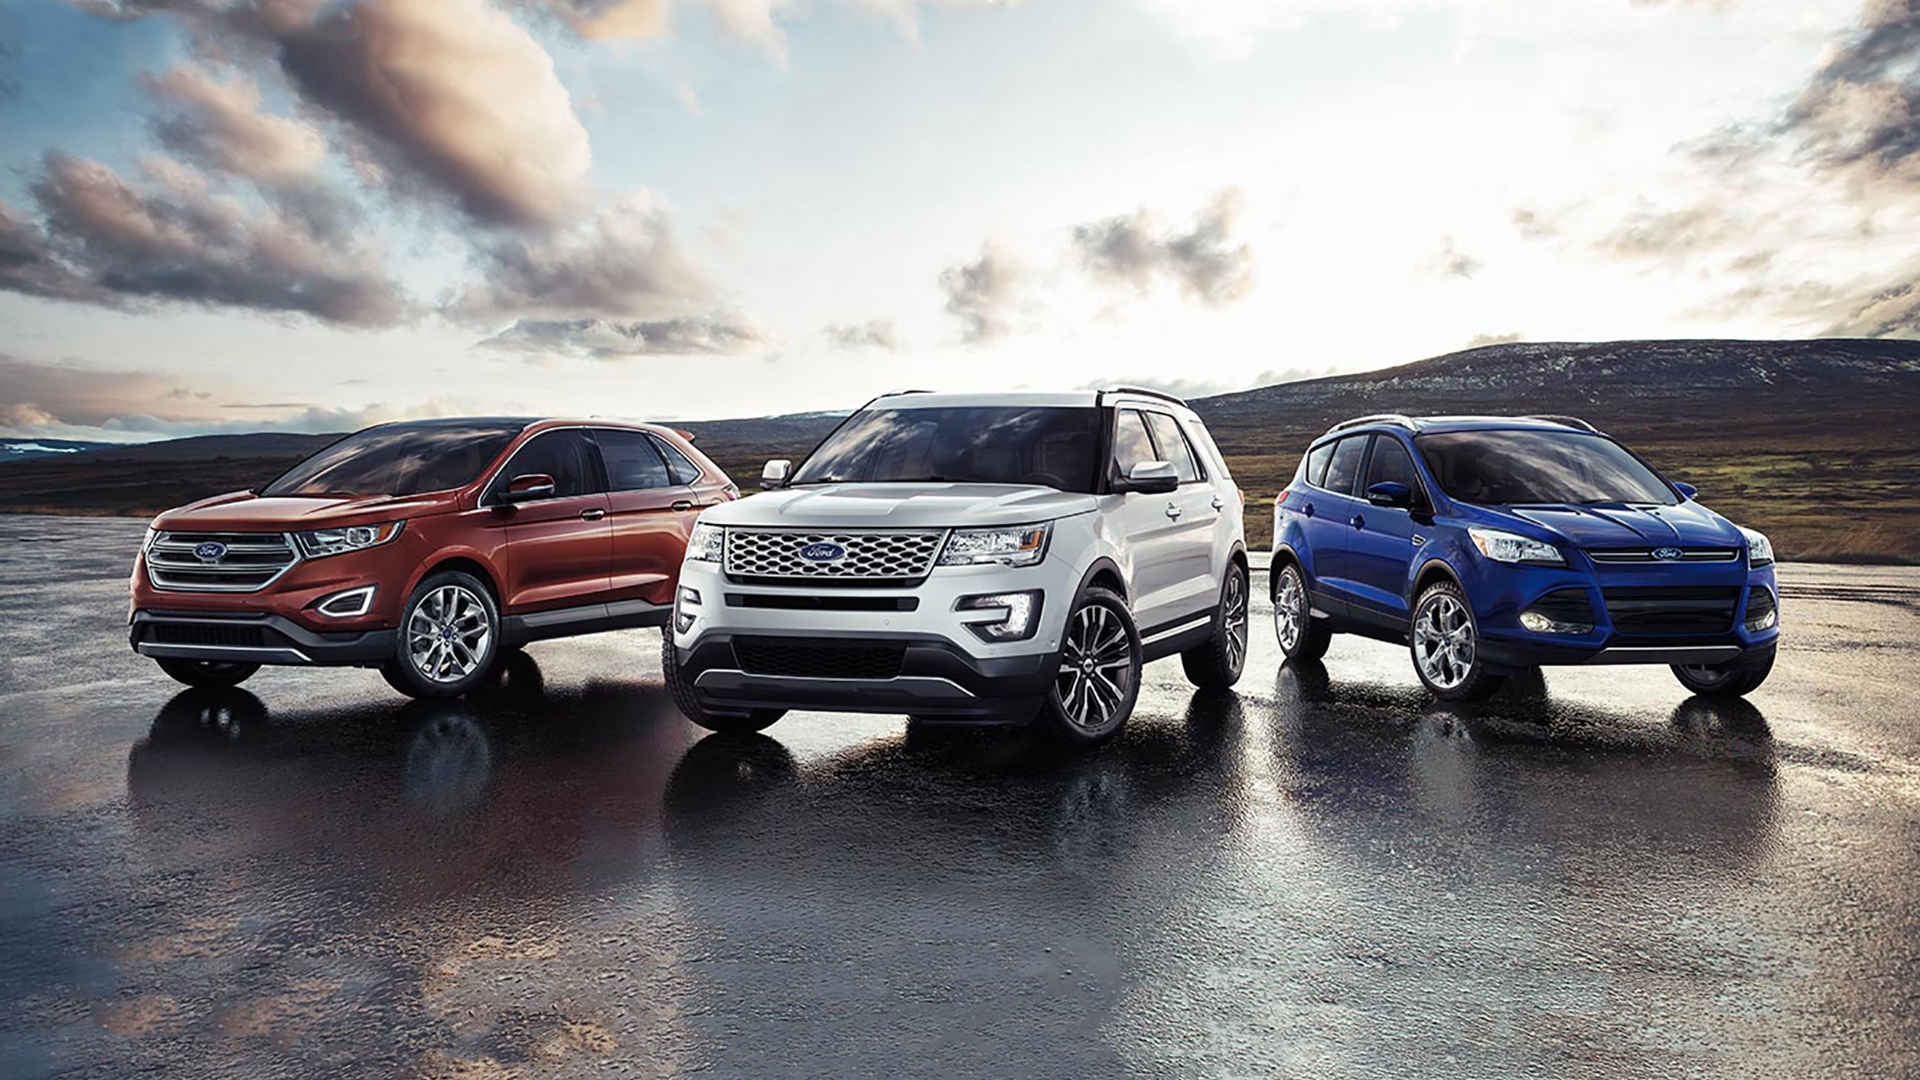 Three Ford SUVs, One Five-Star Safety Rating